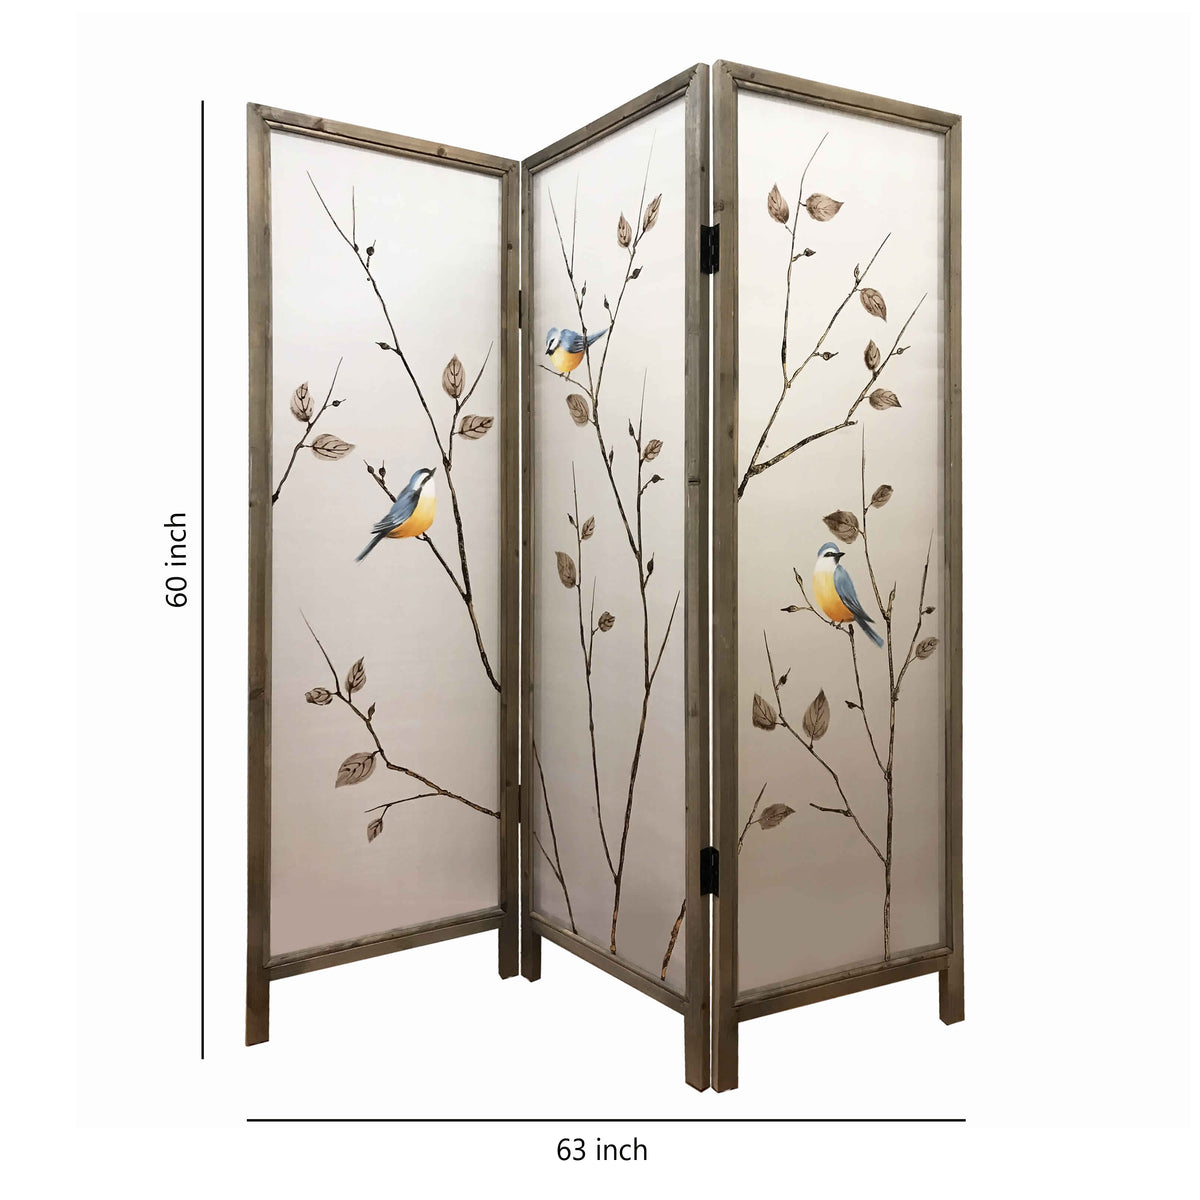 Art Styled 3 Panel Wooden Screen with Hand painted Fabric Design, Beige - BM205893